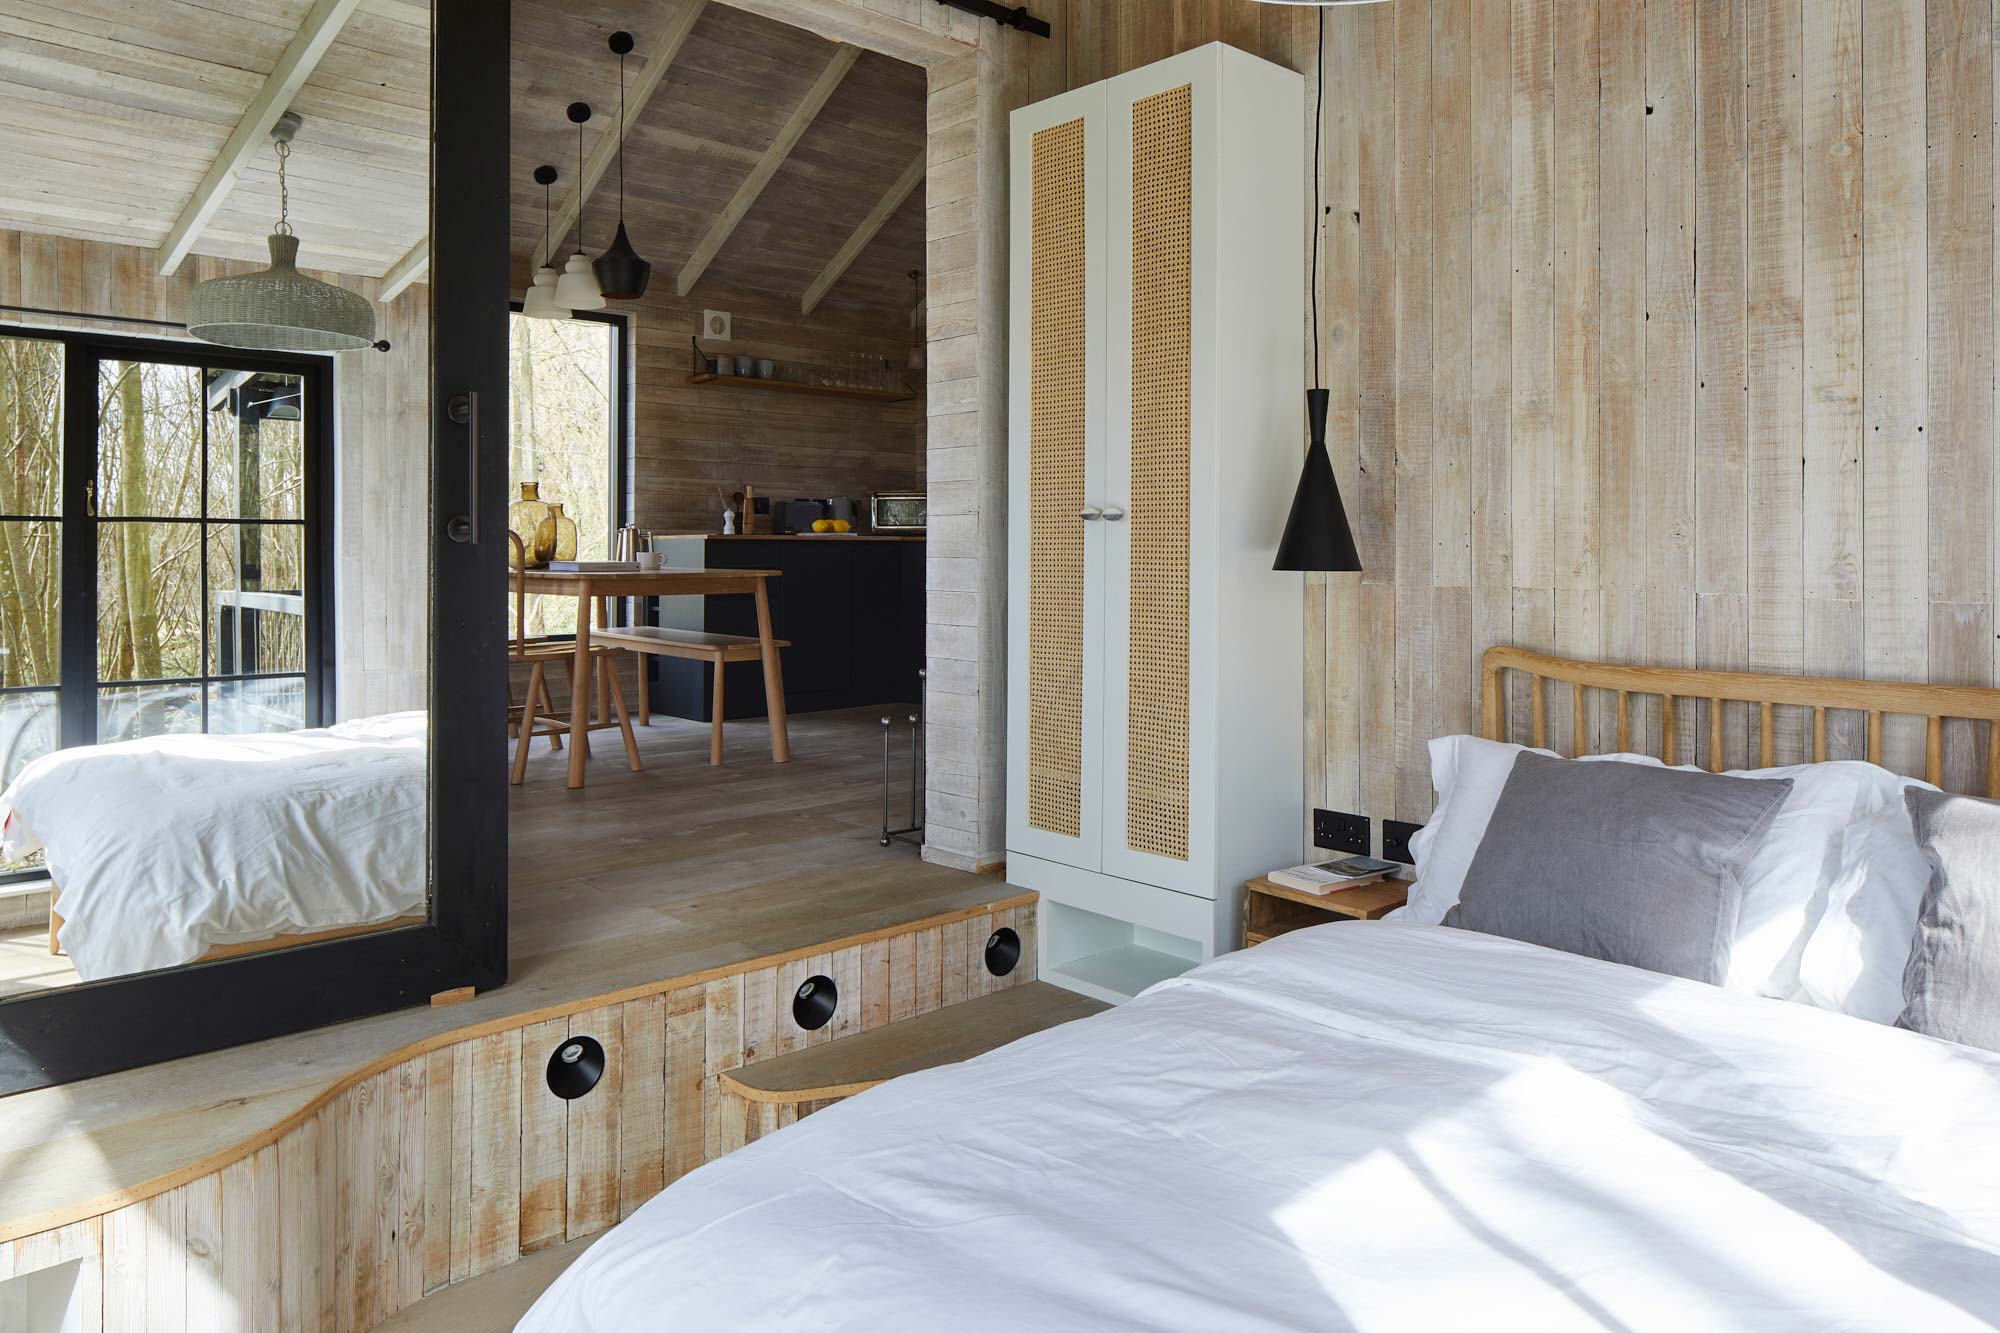 Bedroom cladded in reclaimed timber